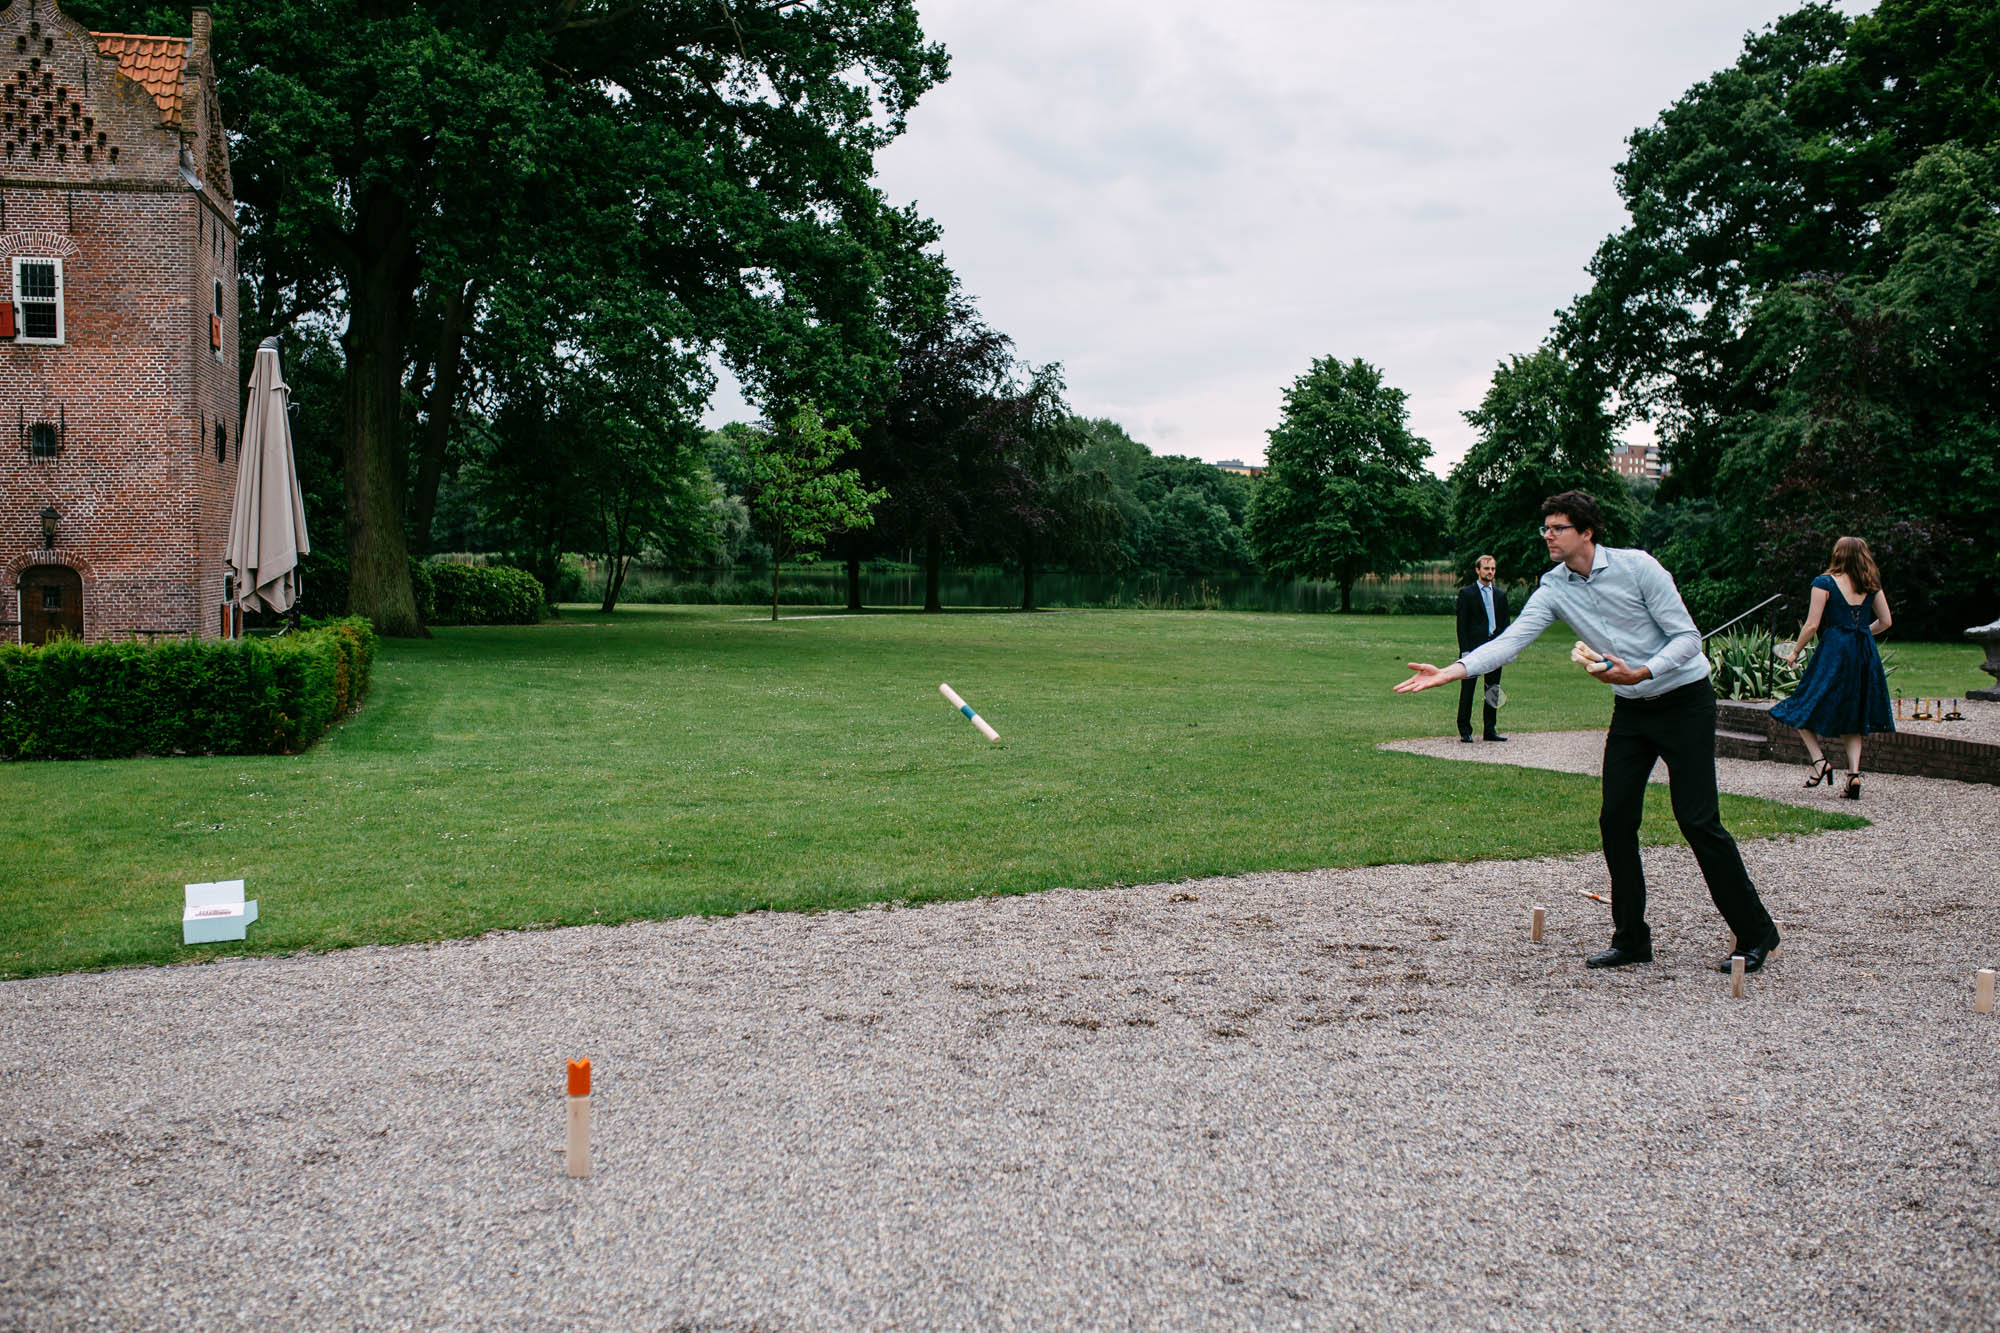 A man playing Frisbee in a park during a wedding match.